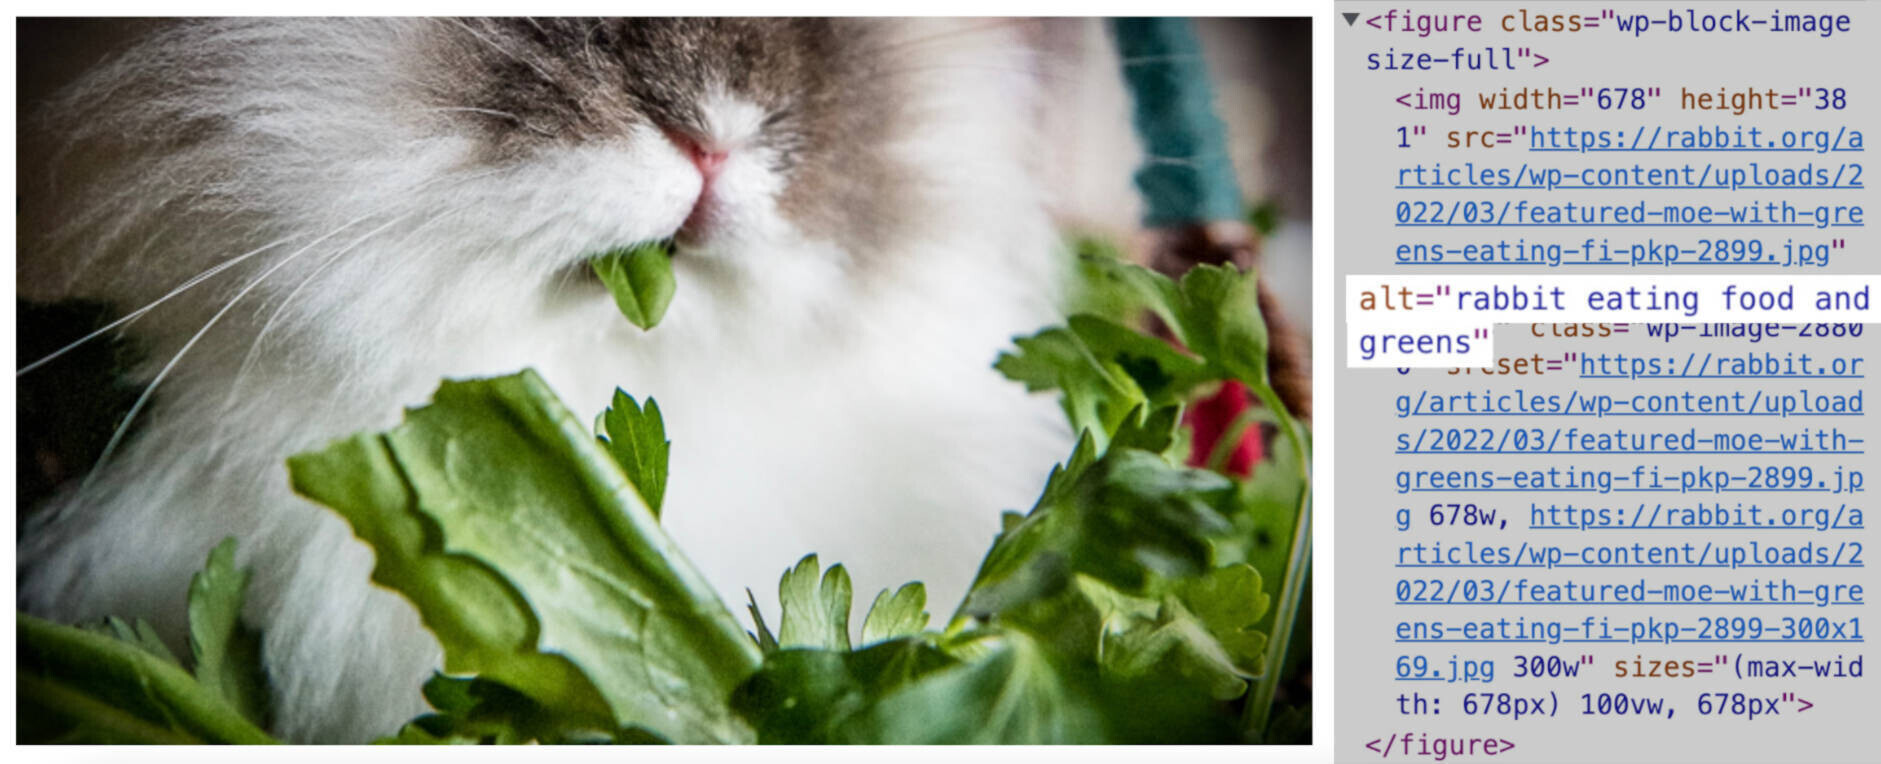 alt text example for an image of a rabbit eating food and greens